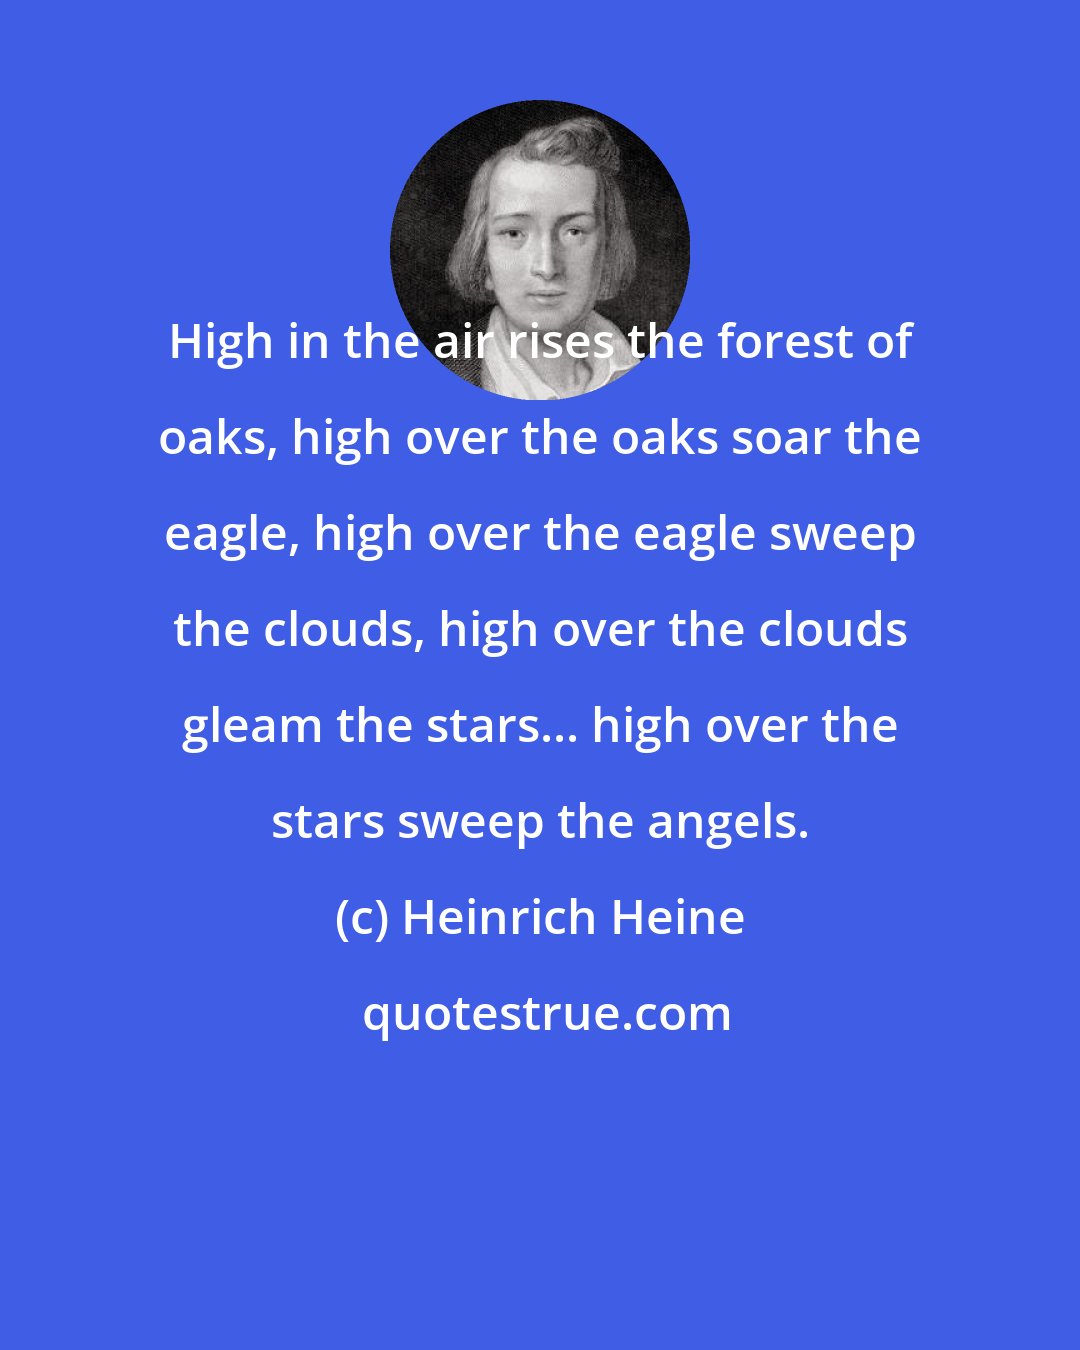 Heinrich Heine: High in the air rises the forest of oaks, high over the oaks soar the eagle, high over the eagle sweep the clouds, high over the clouds gleam the stars... high over the stars sweep the angels.